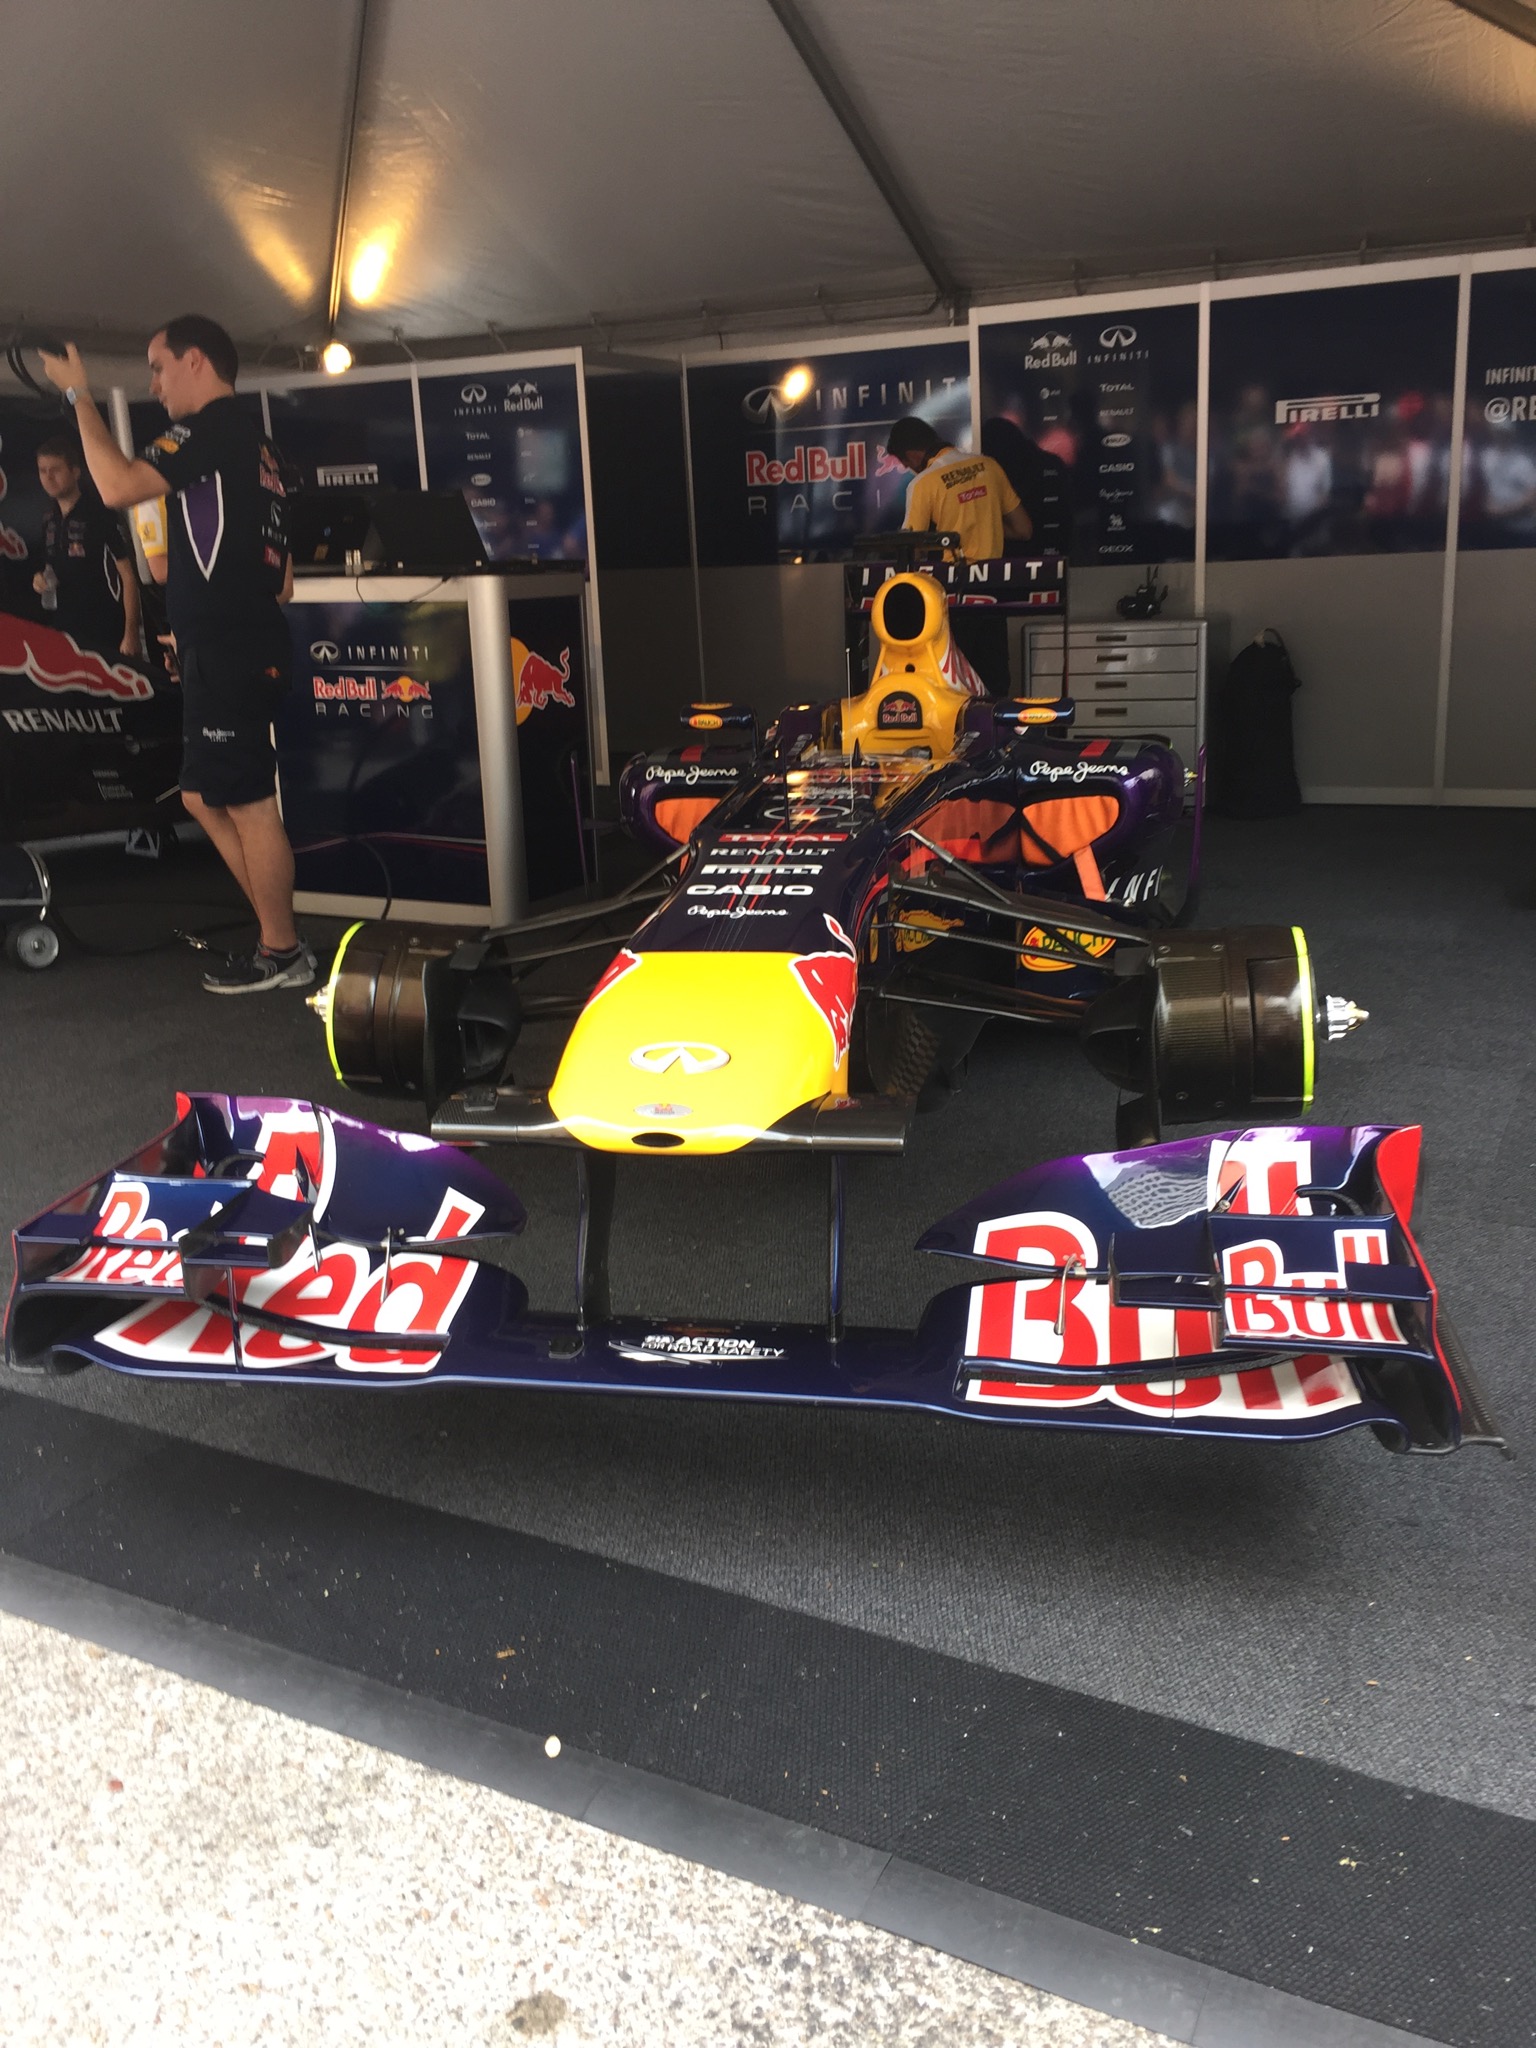 The Real RB7